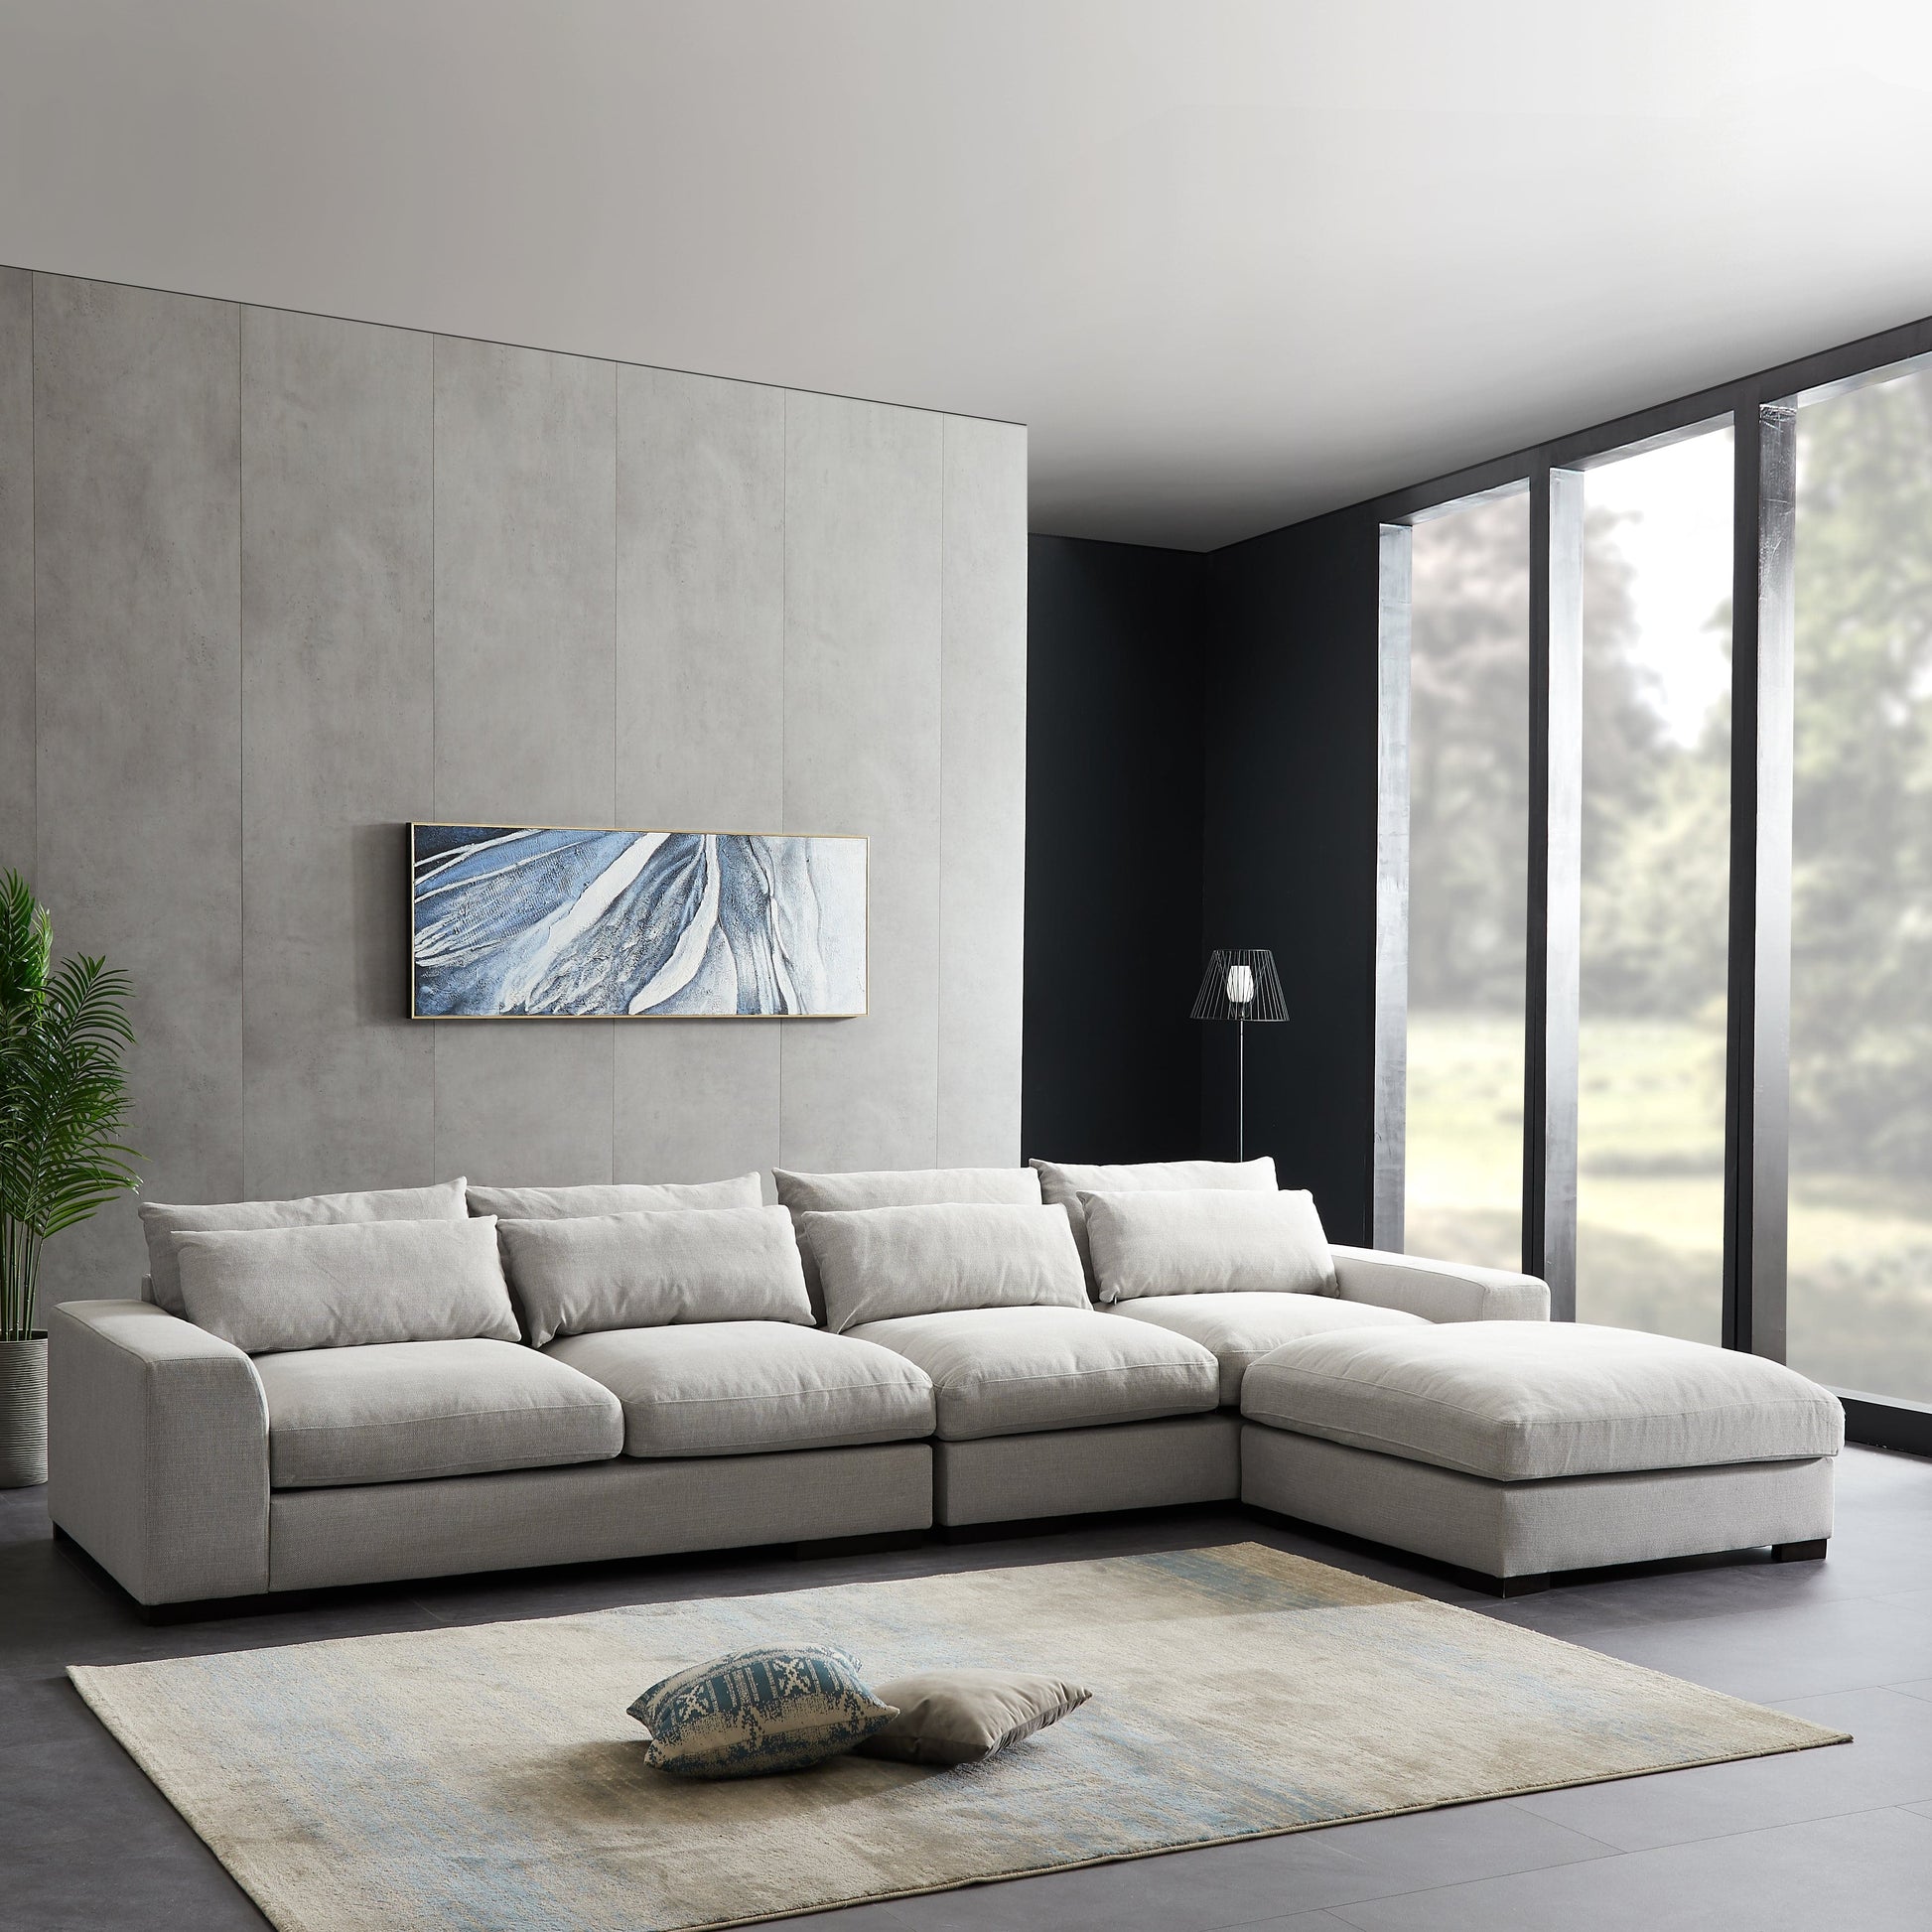 TFC&H Co. SOFA AND COMFORTABLE SECTIONAL SOFA - LIGHT GREY- Ships from The US - sectional at TFC&H Co.